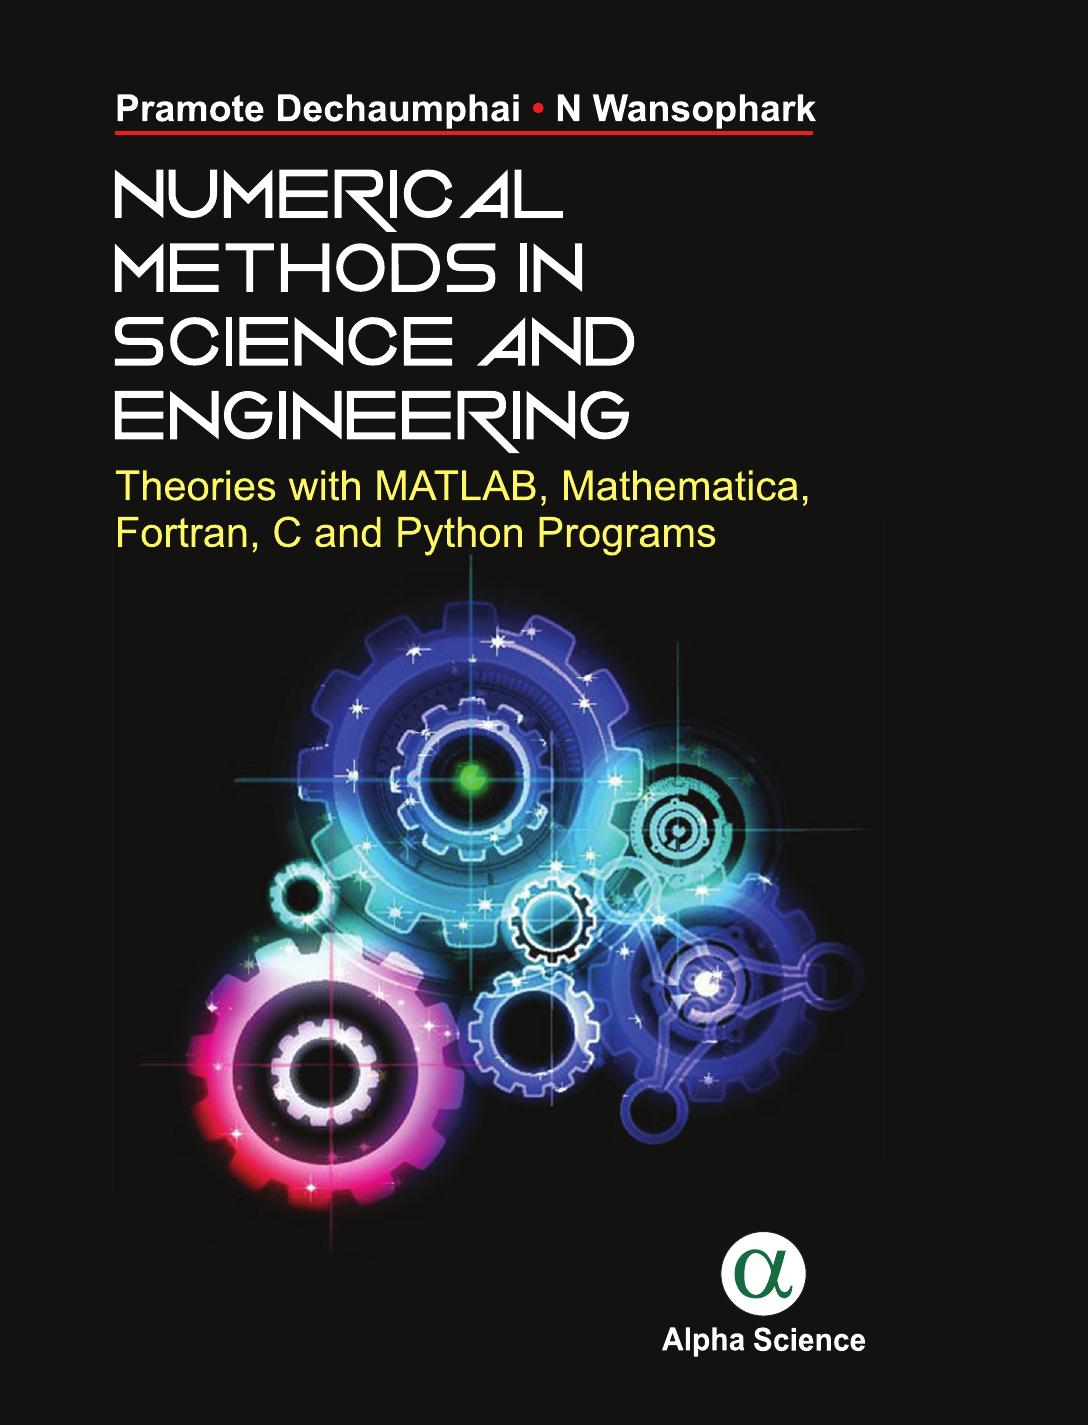 Numerical Methods in Science and Engineering Theories with MATLAB, Mathematica®, Fortran, C and Python Programs